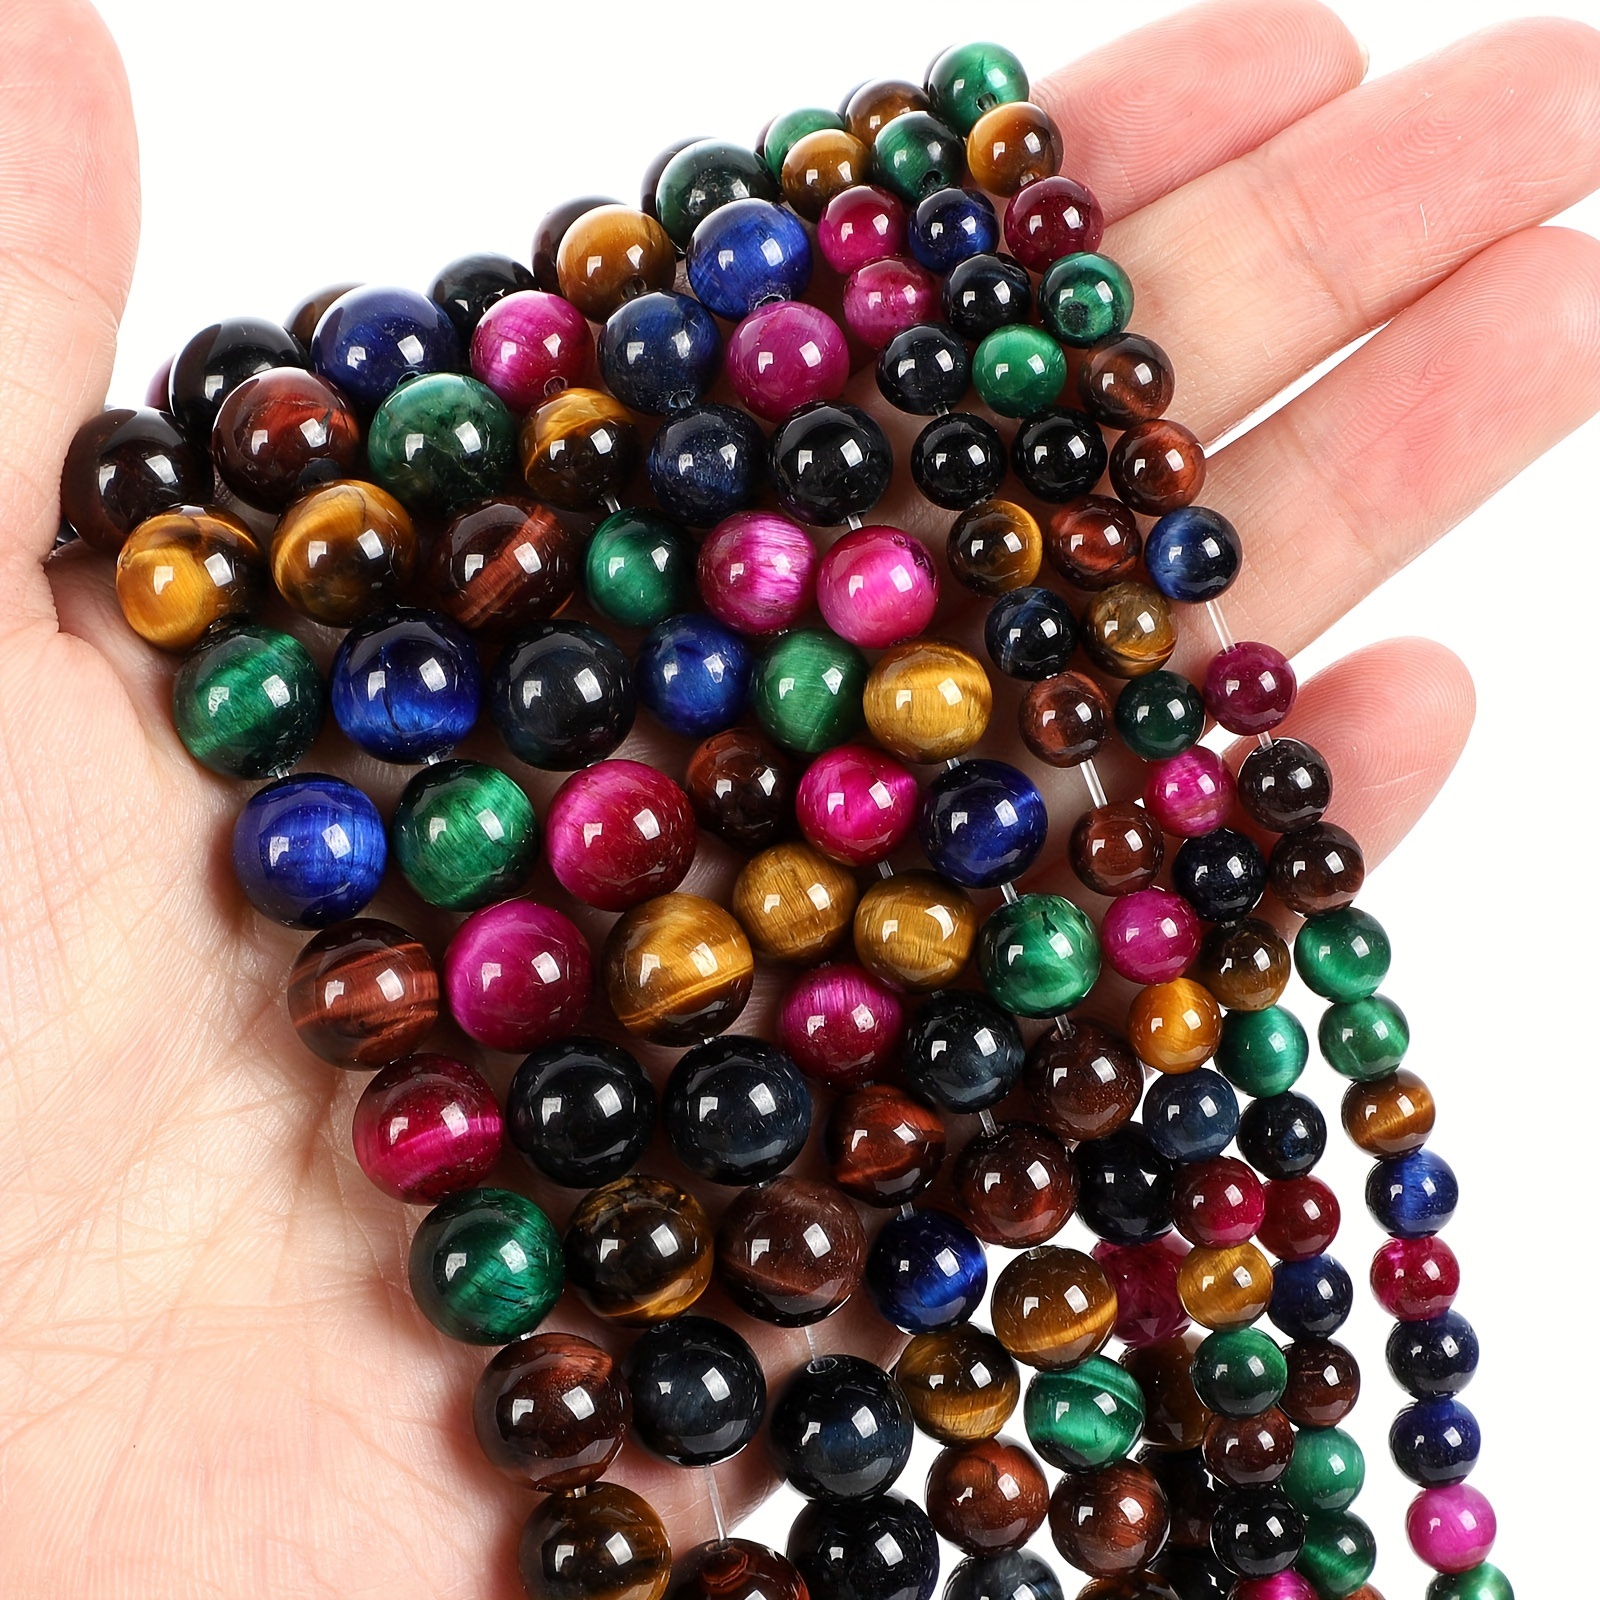 

Multicolour Tiger Eye Stone Round Loose Beads For Jewelry Making Diy Charm Bracelet 4-10mm